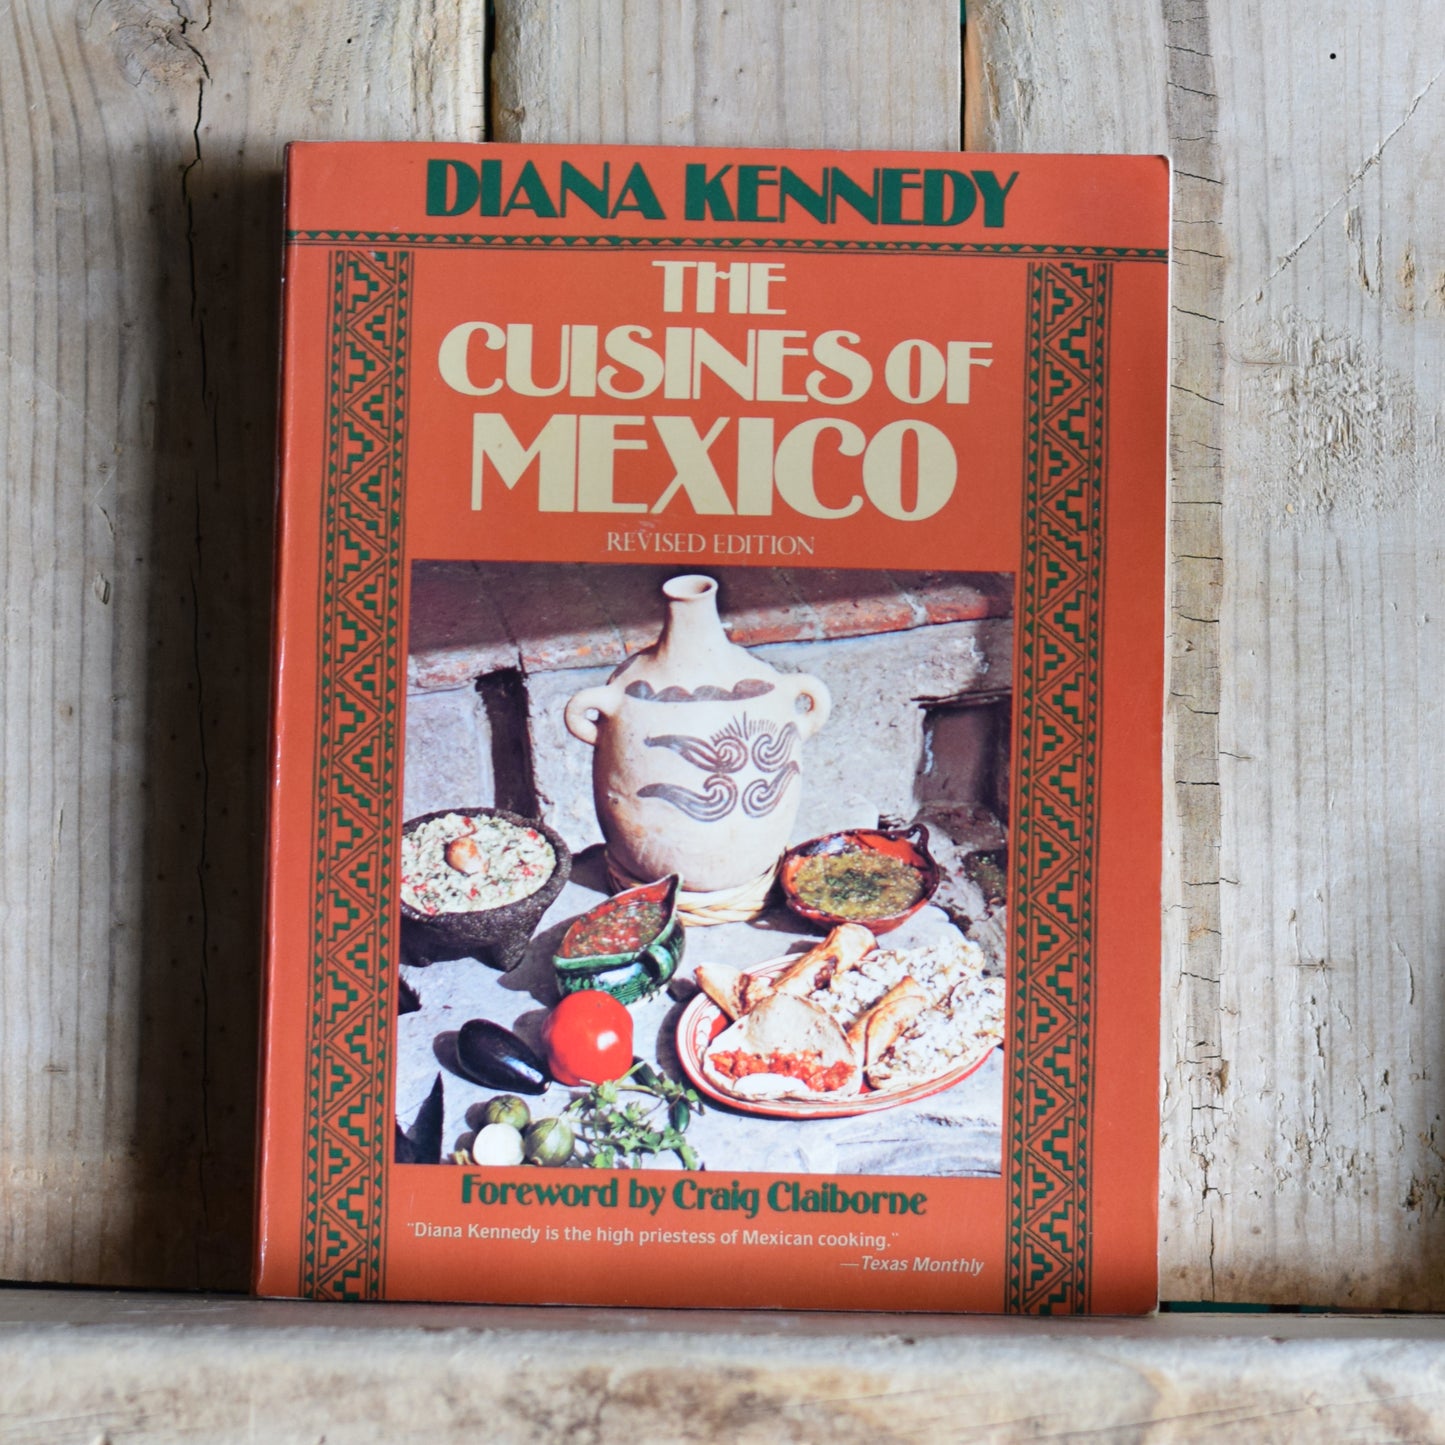 Vintage Cookbook Paperback: Diana Kennedy - The Cuisines of Mexico FIRST PRINTING